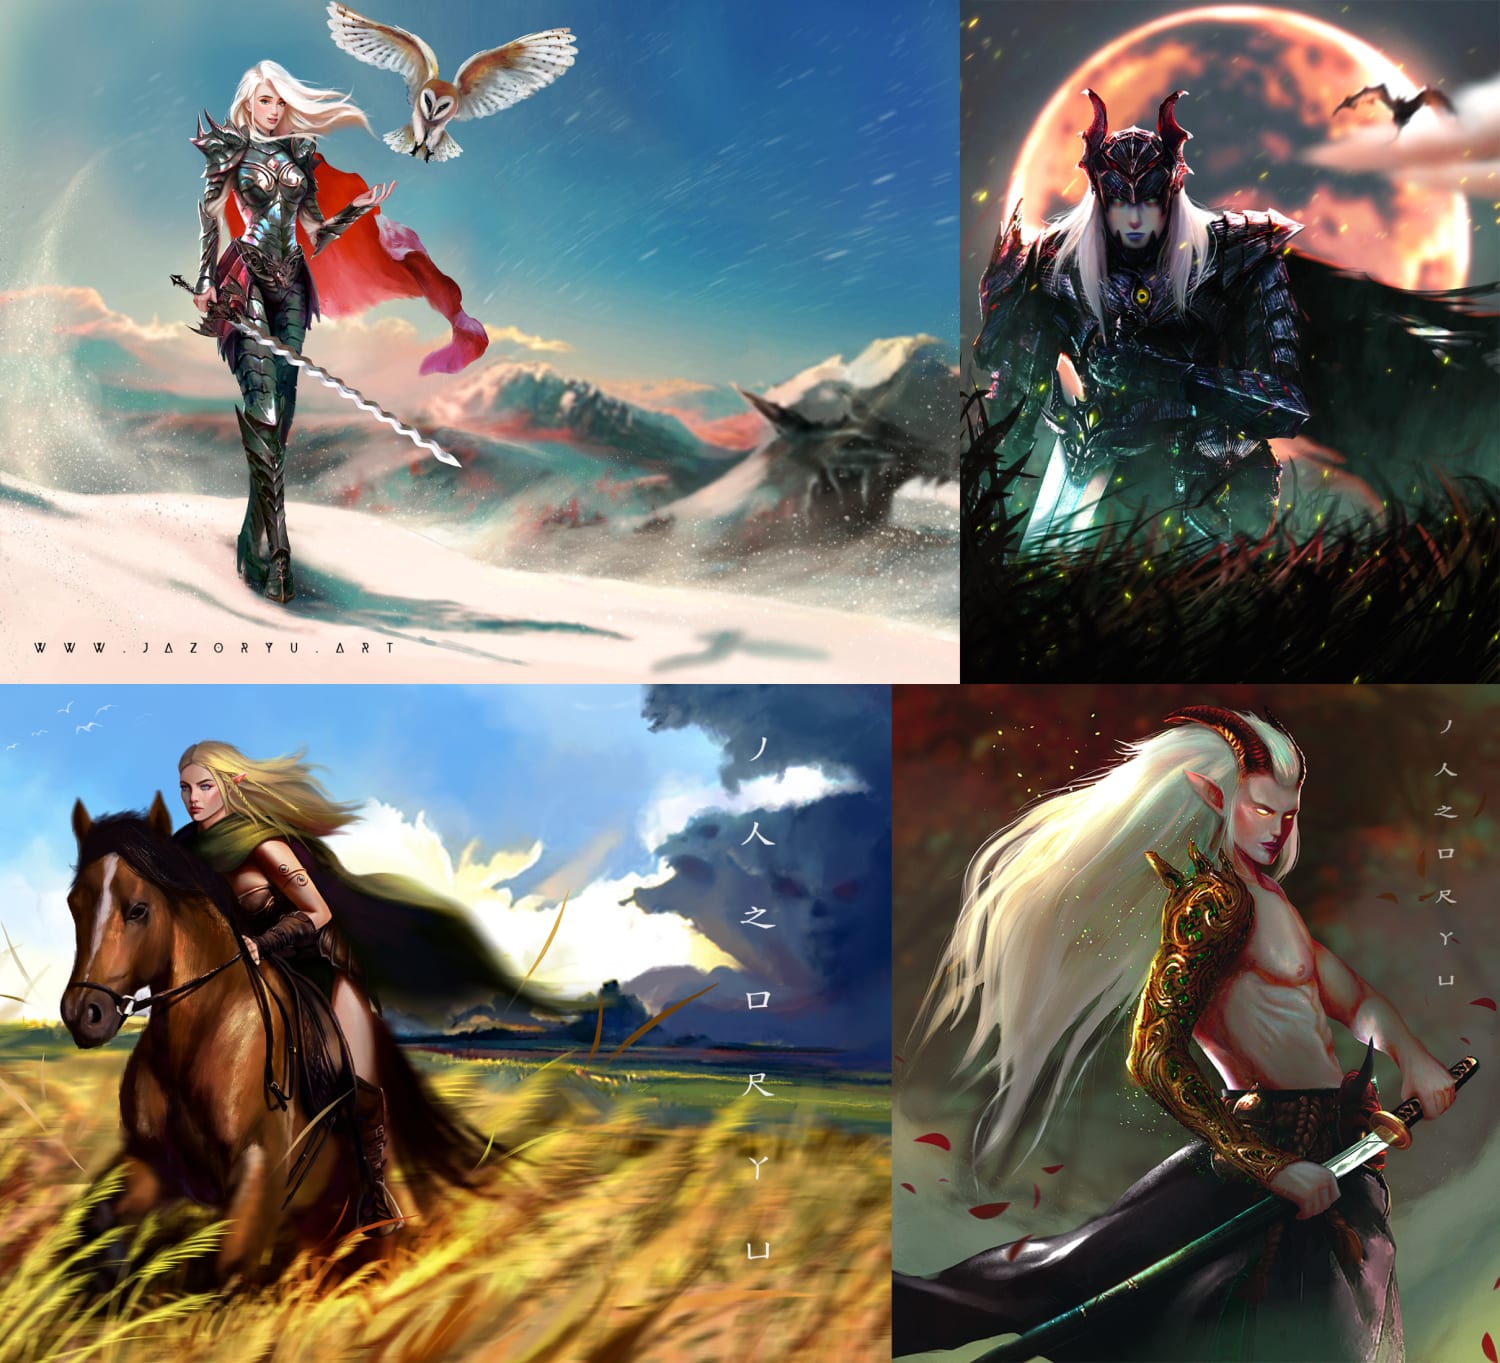 [For Hire] [Art] Hello guys I'm an illustrator/concept artist opening up slots for commissions. Dm me if you're interested